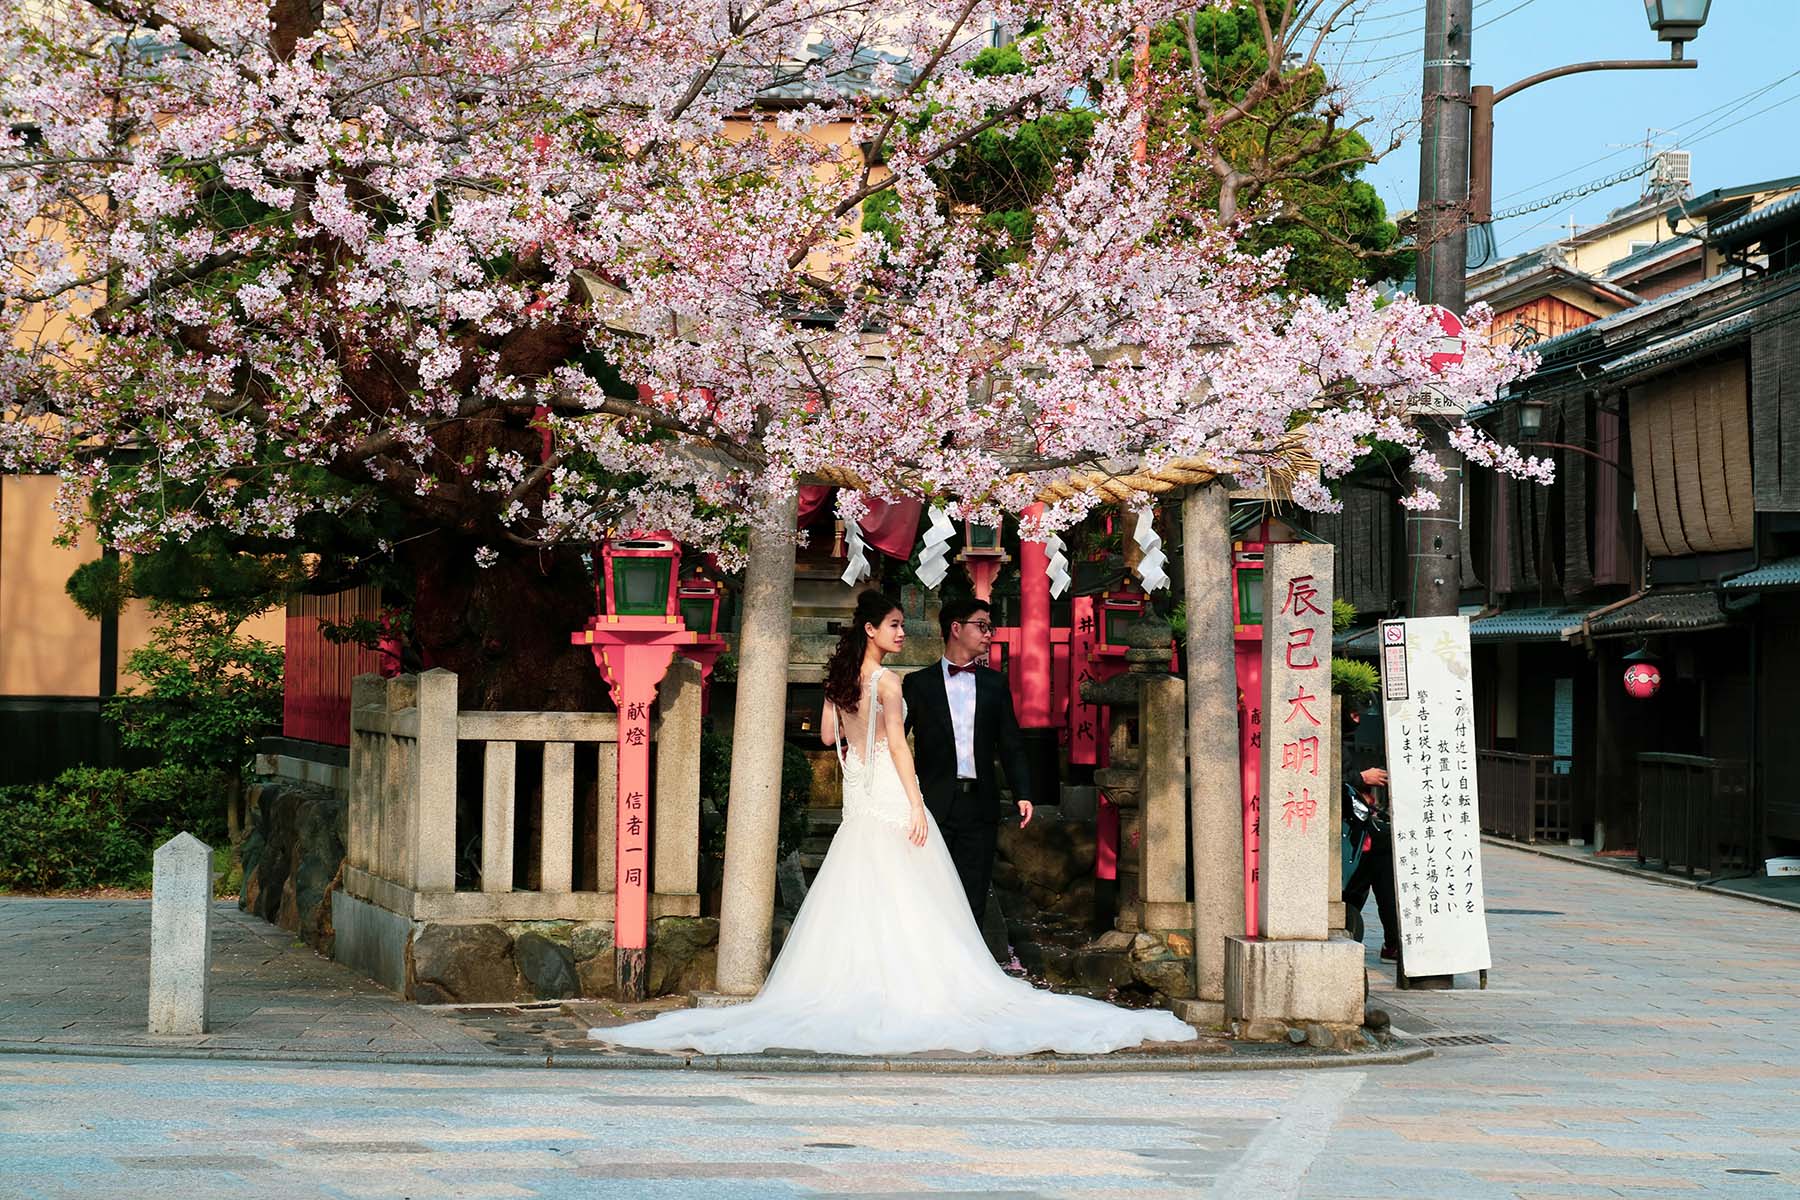 Bridge and groom standing near the entrance of their venue, looking to the side. There is a cherry tree blossoming.